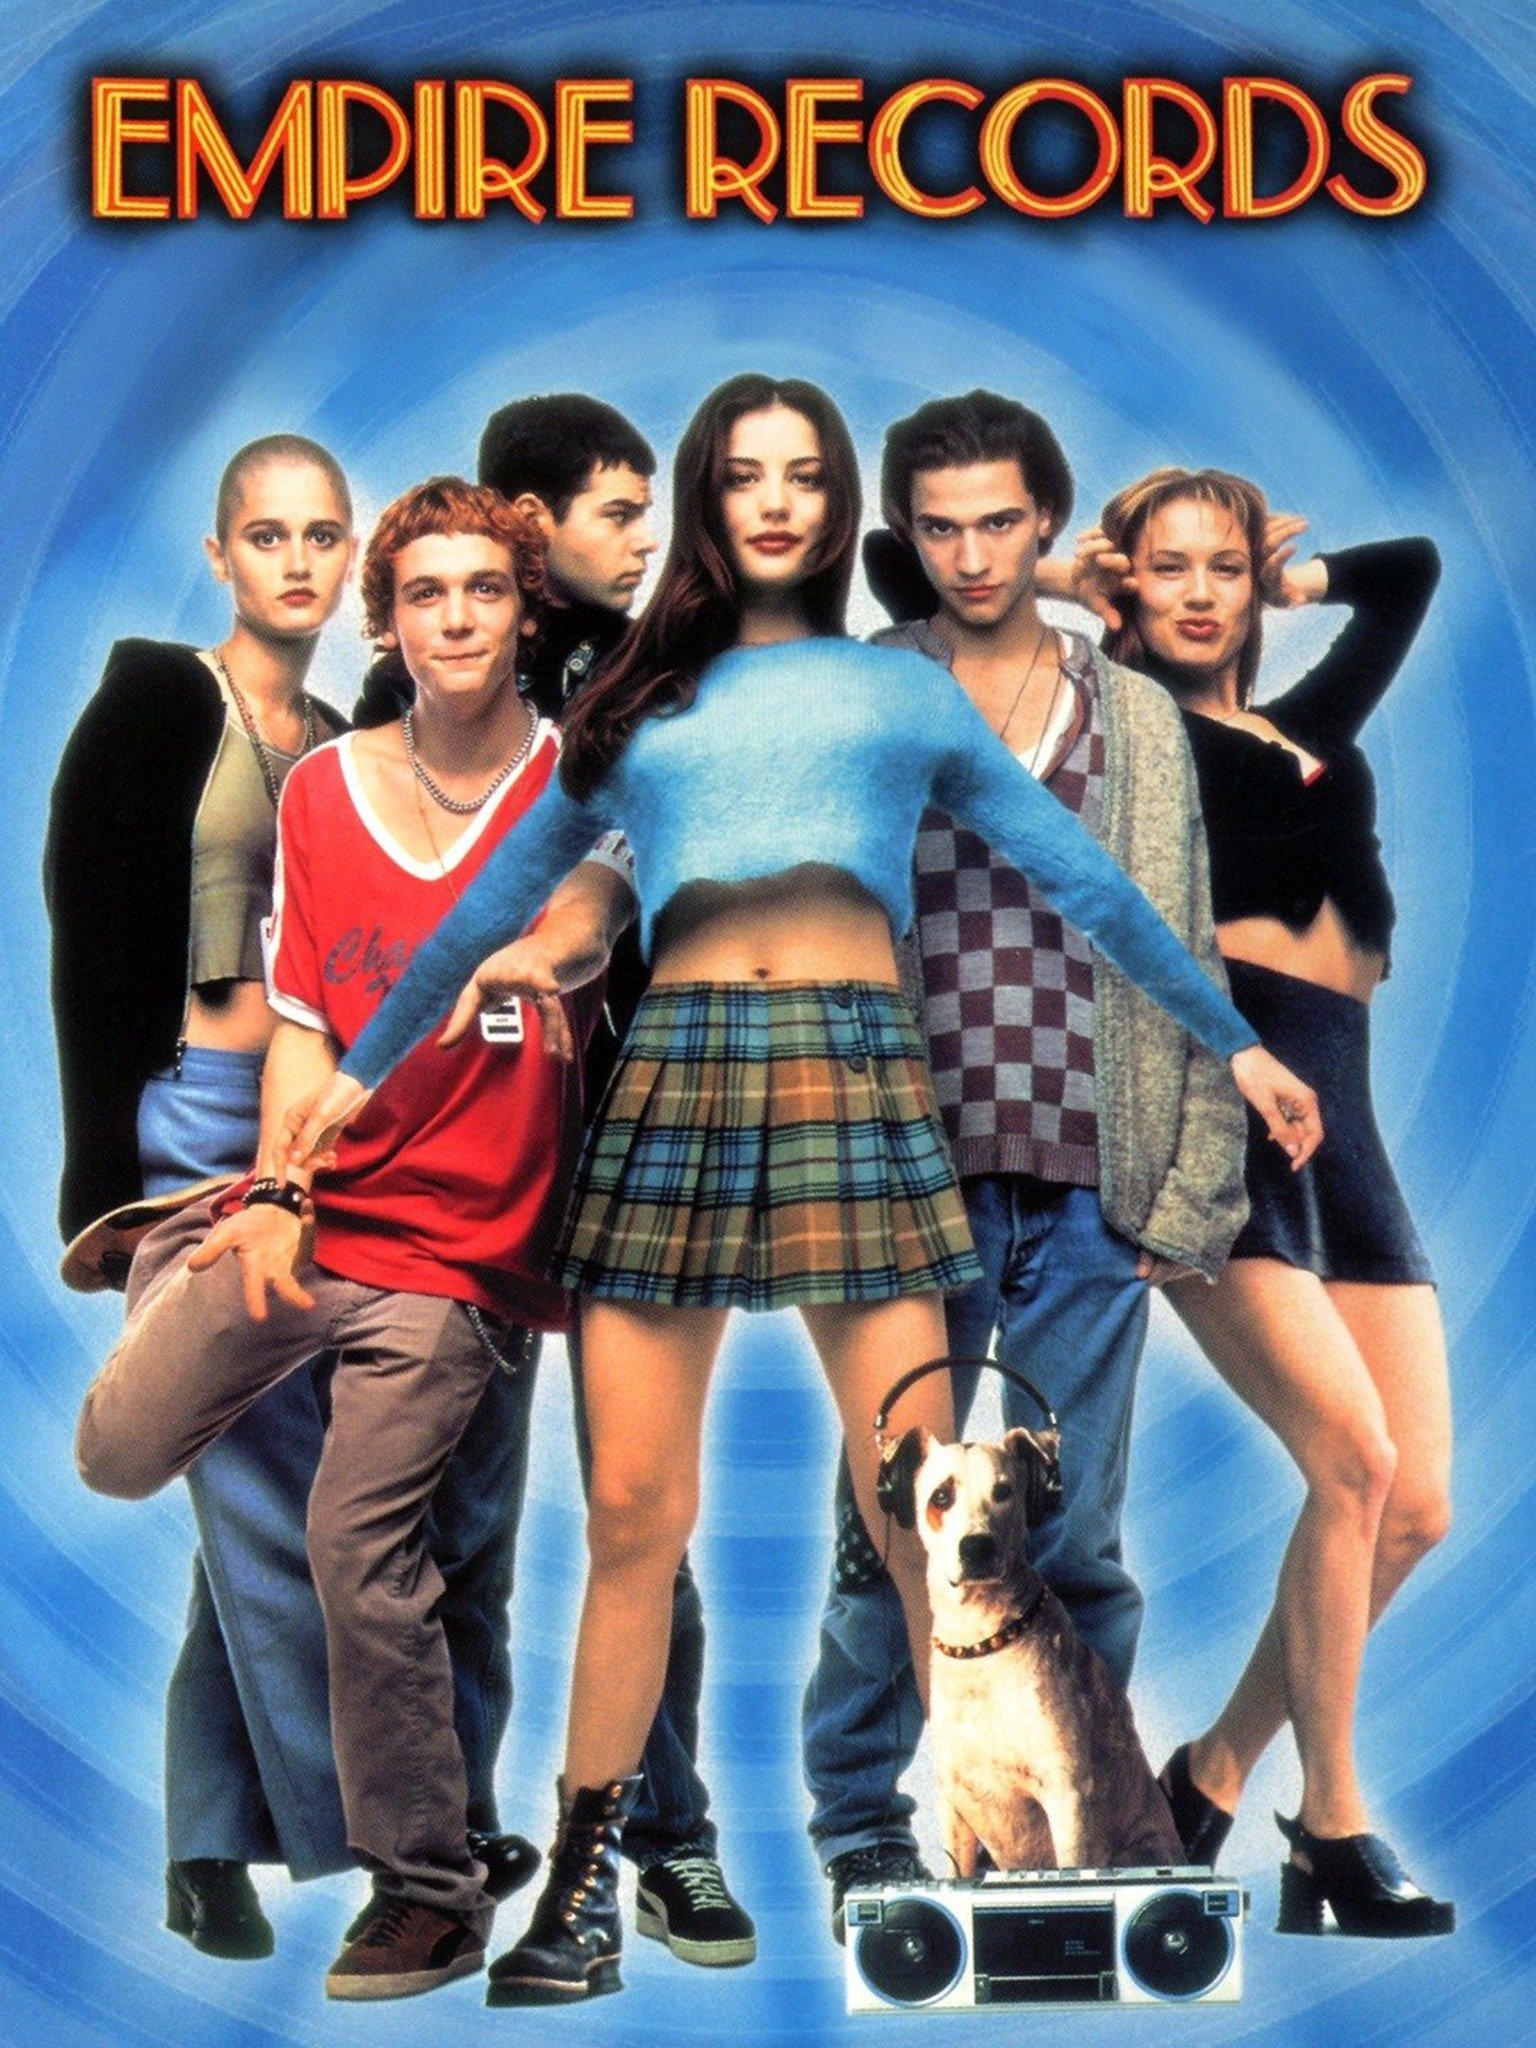 Empire Records (1995) Unpopular Movie Opinions That Shouldn't Be